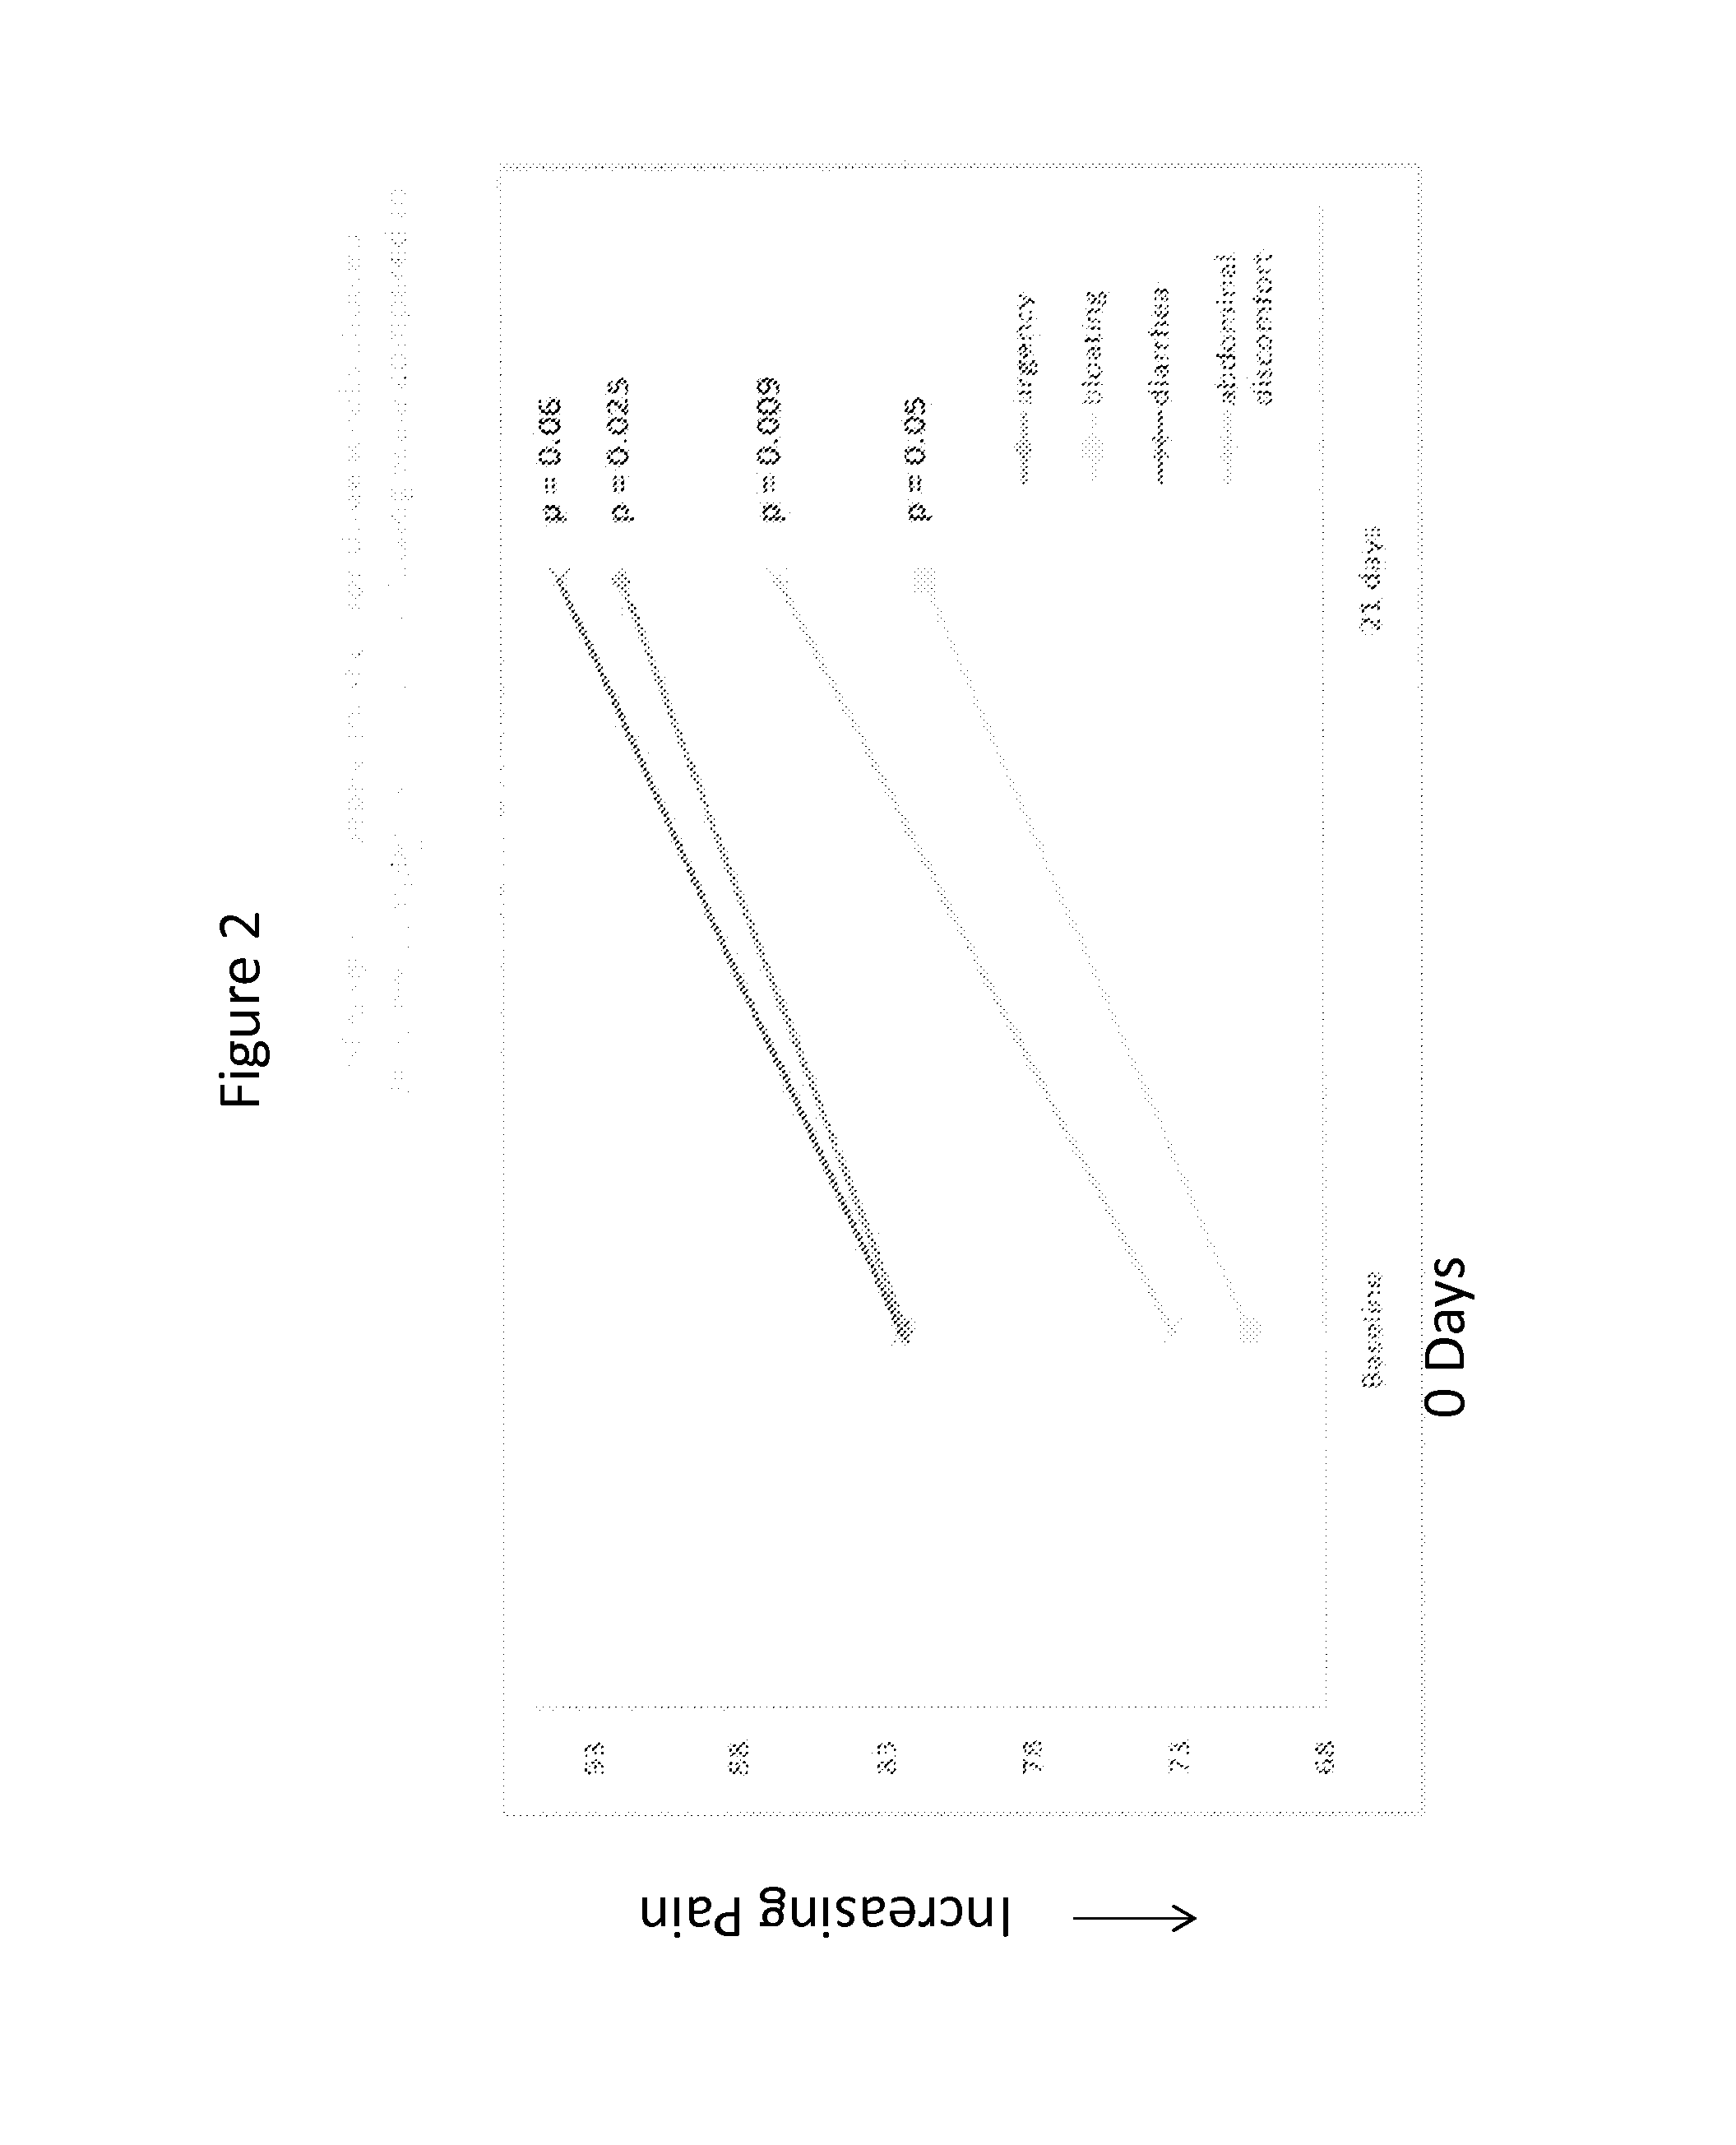 Method of treating digestive upsets by buccal administration of botanical derivatives